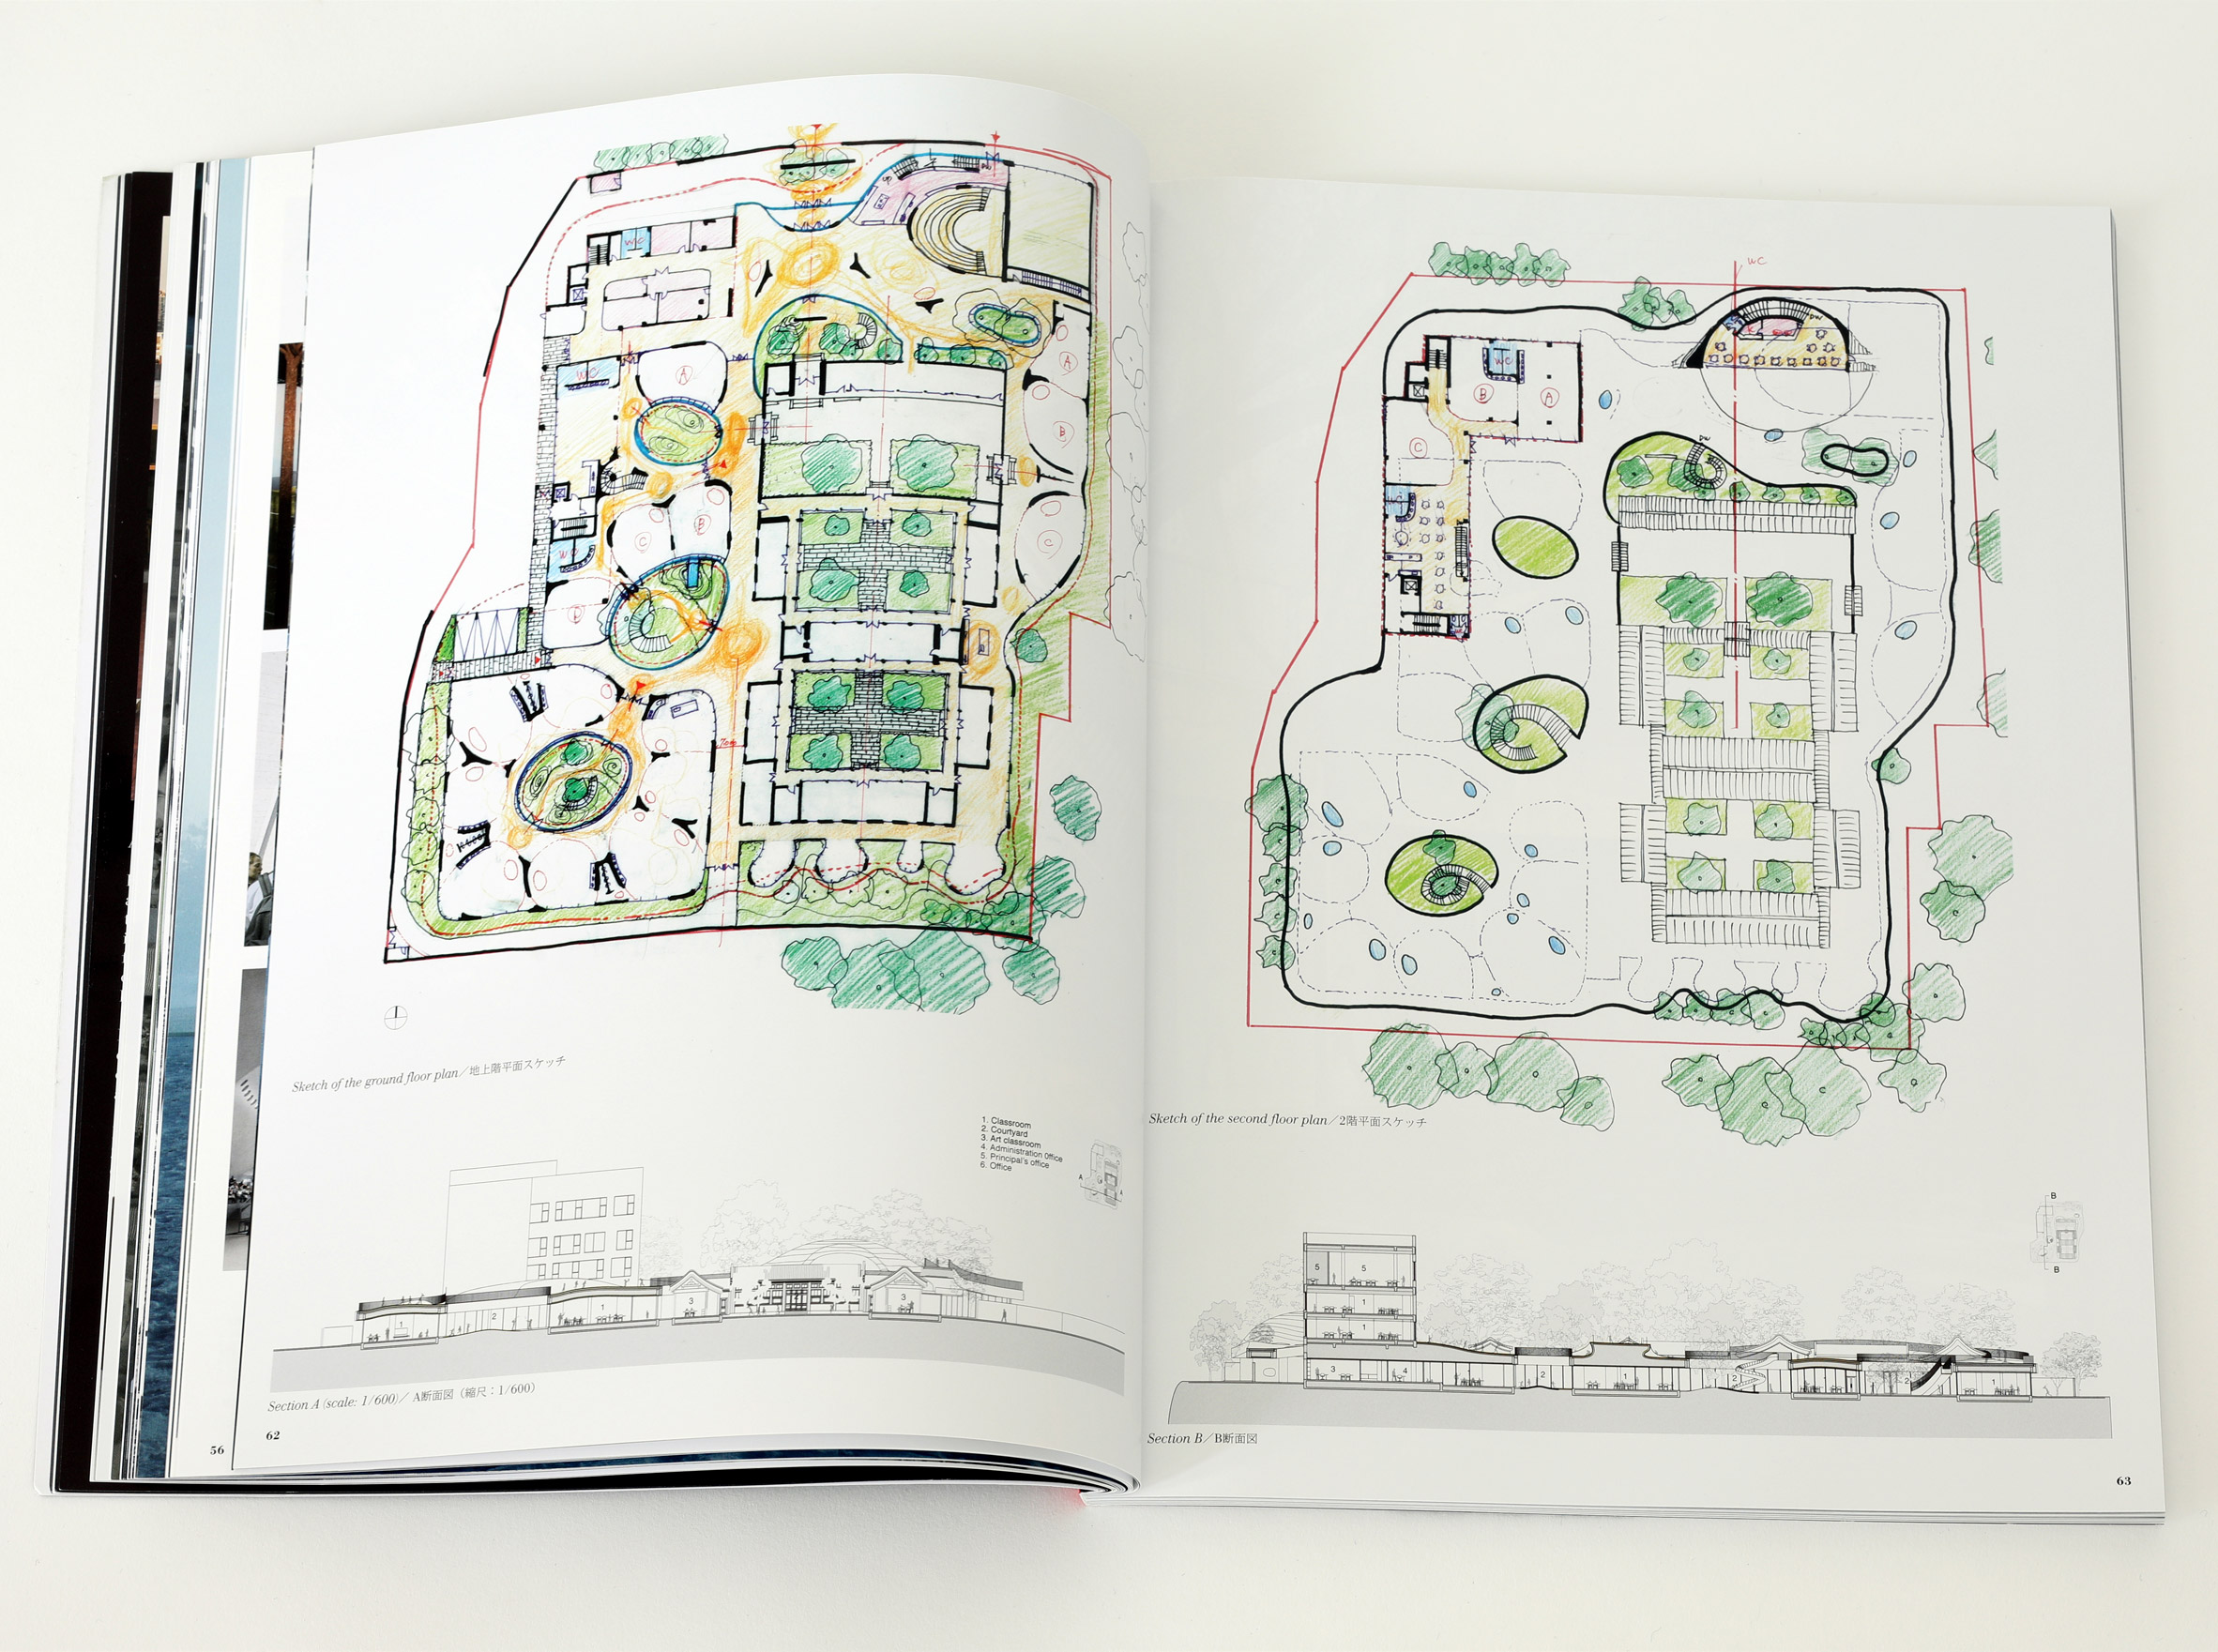 Spread from Dreamscape by a+u: Architecture and Urbanism magazine about Courtyard Kindergarten